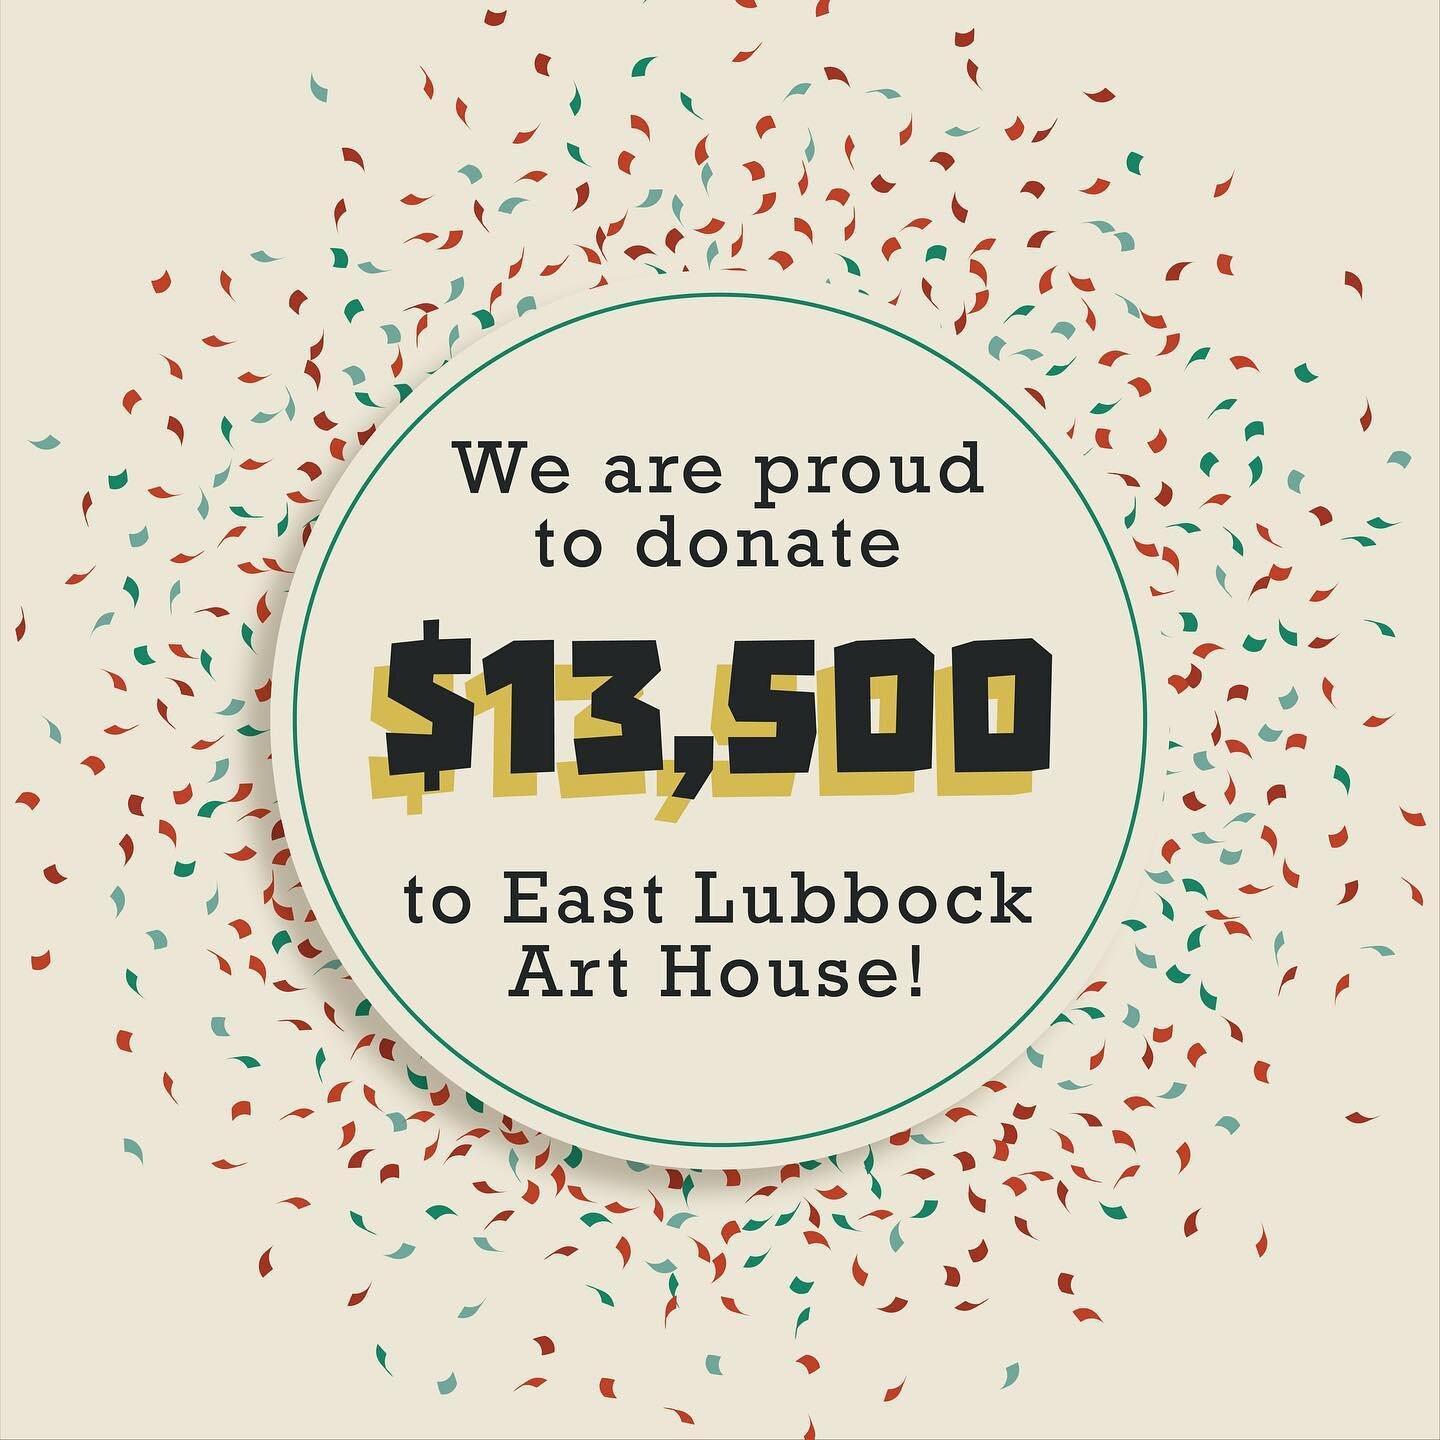 We are incredibly excited to share that we were able to donate $13,500 to @eastlubbockarthouse from this years Lubbock Live Festival! 
-
East Lubbock Art House is doing great things for our community and it is our honor to be able to help. Go check t